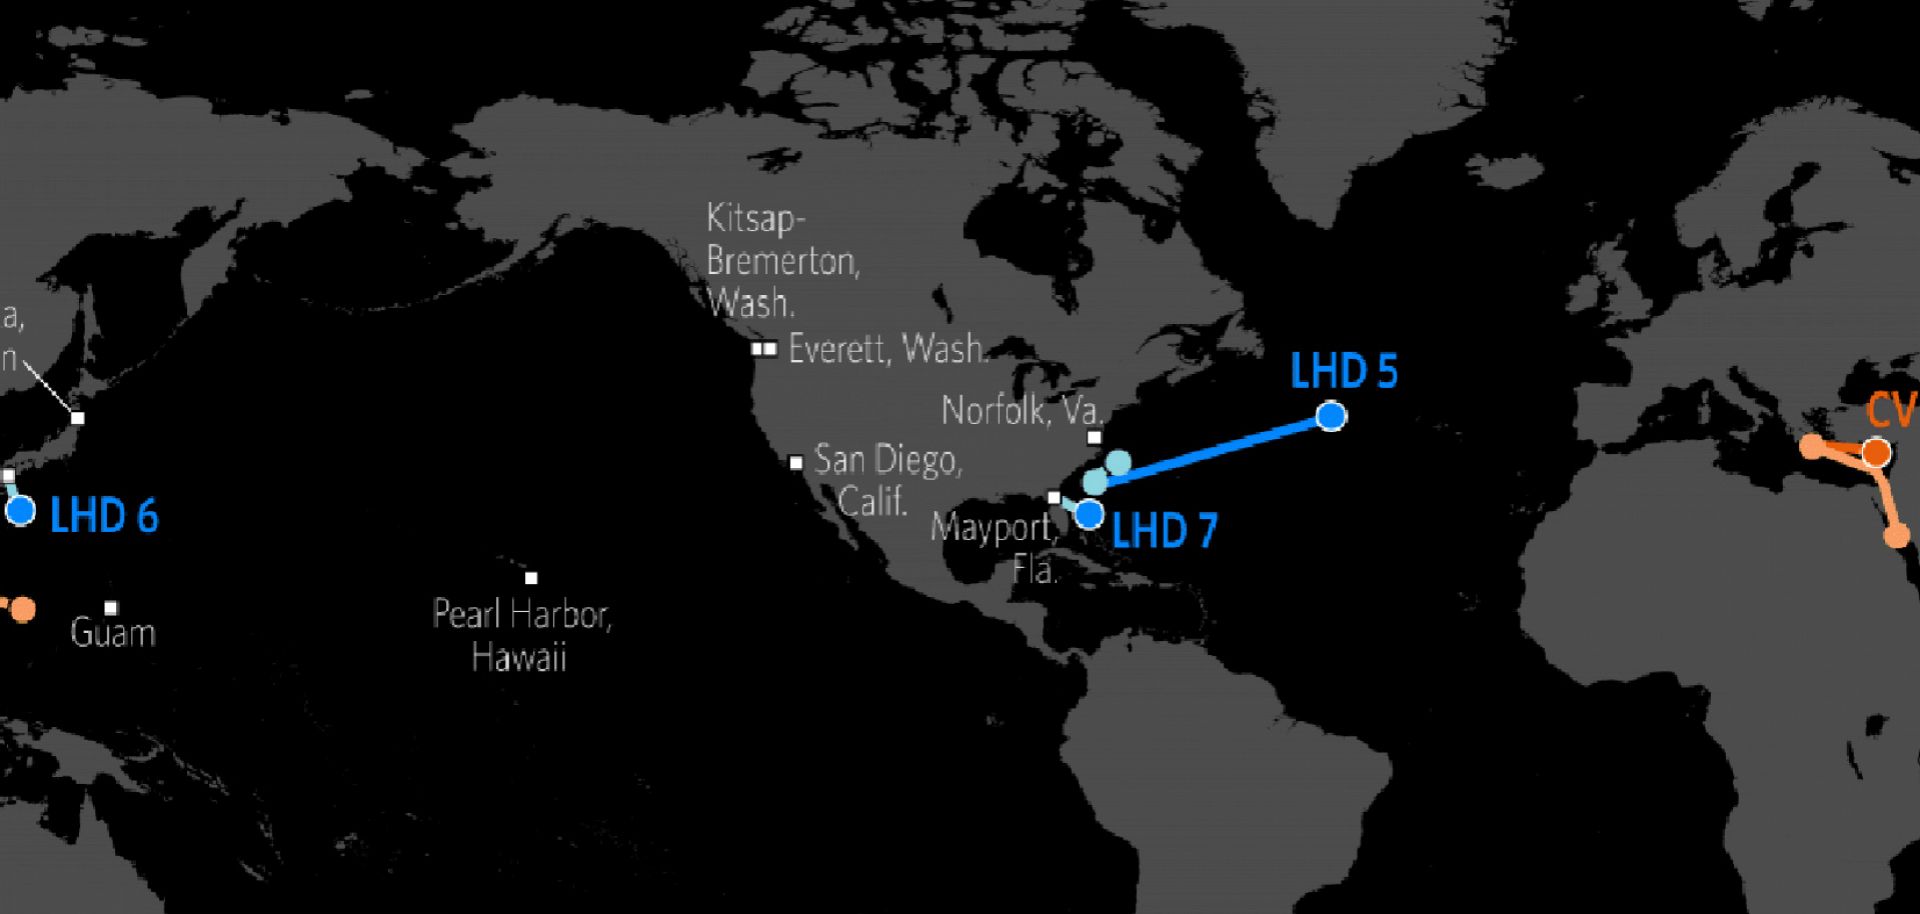 This map shows the approximate locations of U.S. Carrier Strike Groups and Amphibious Ready Groups.